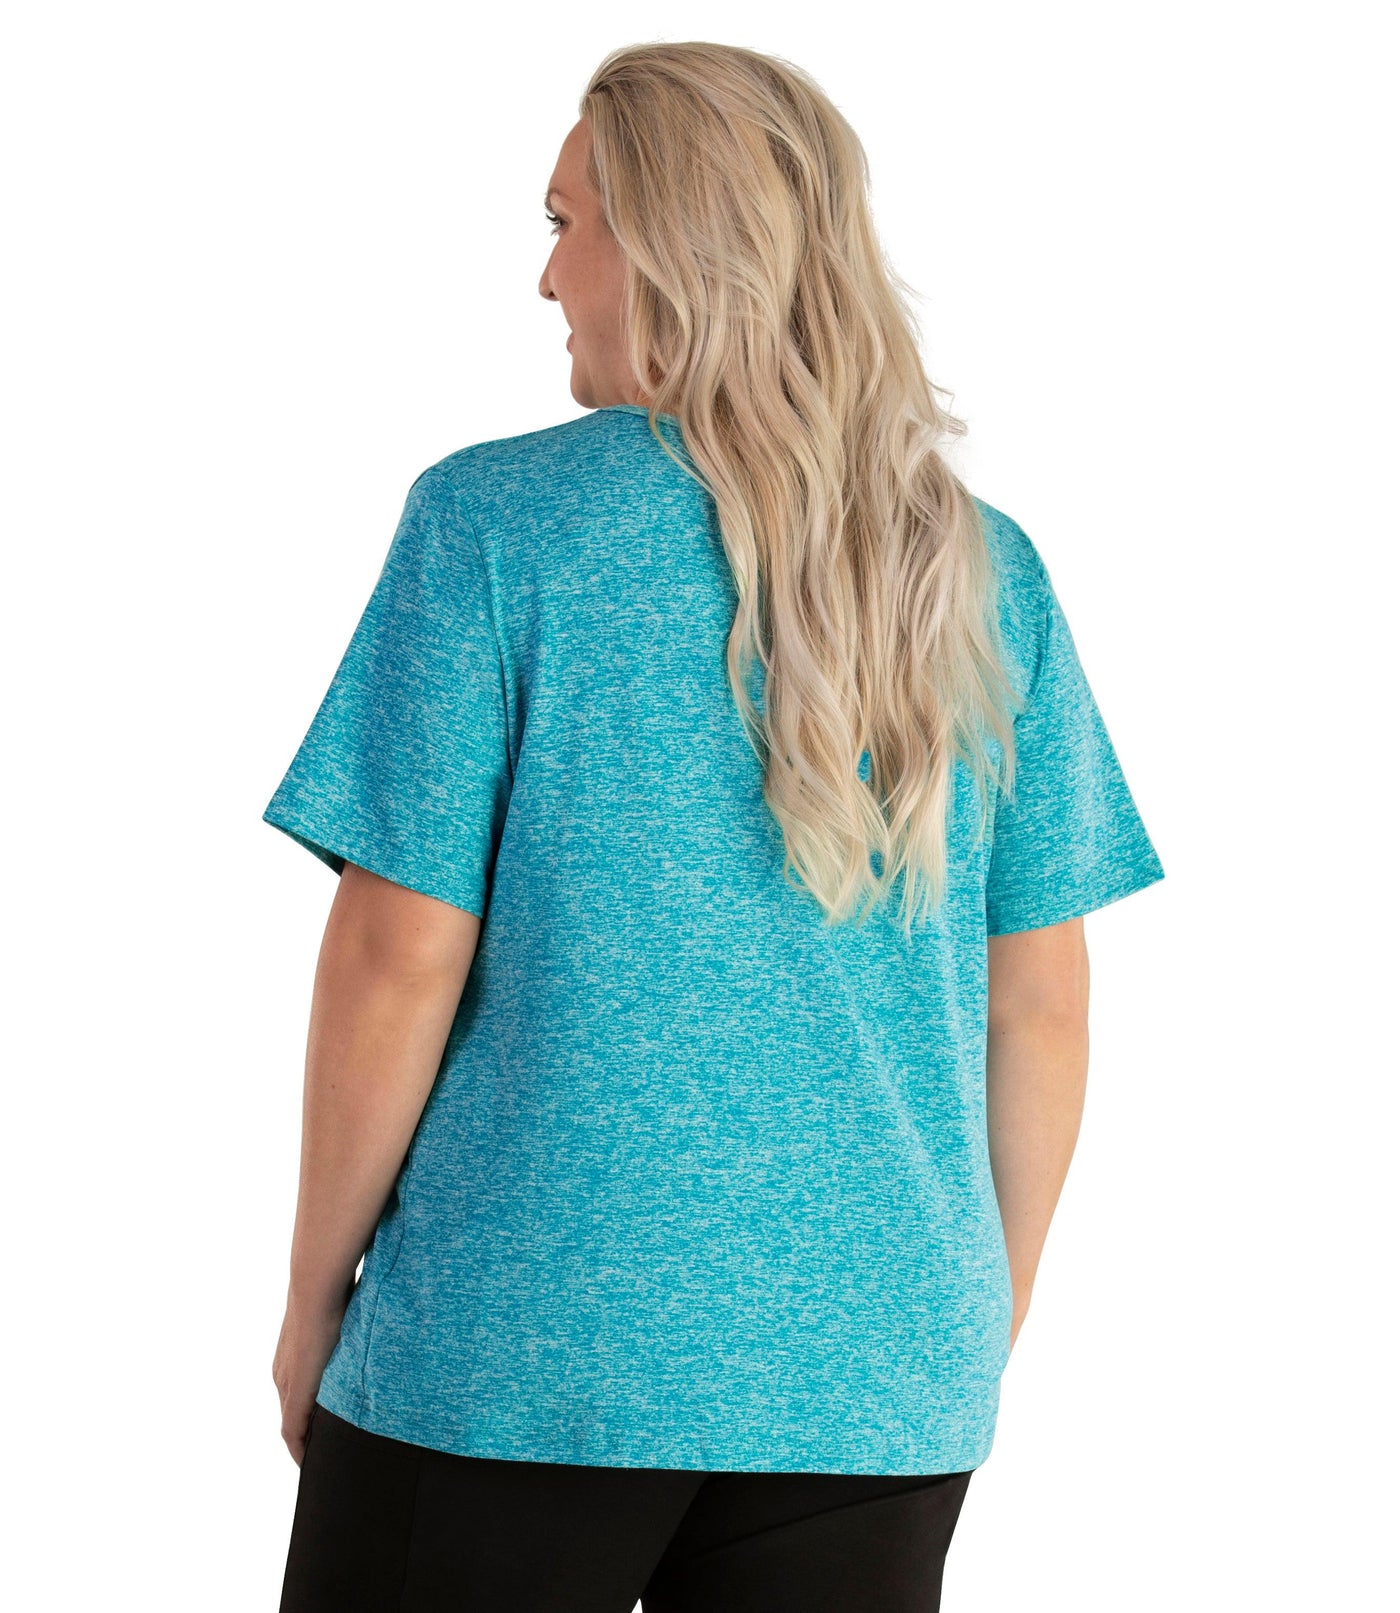 Plus size woman, facing back, wearing JunoActive plus size SoftWik V-Neck Tee in the color Ocean Blue. She is wearing JunoActive Plus Size Leggings in the color Black.